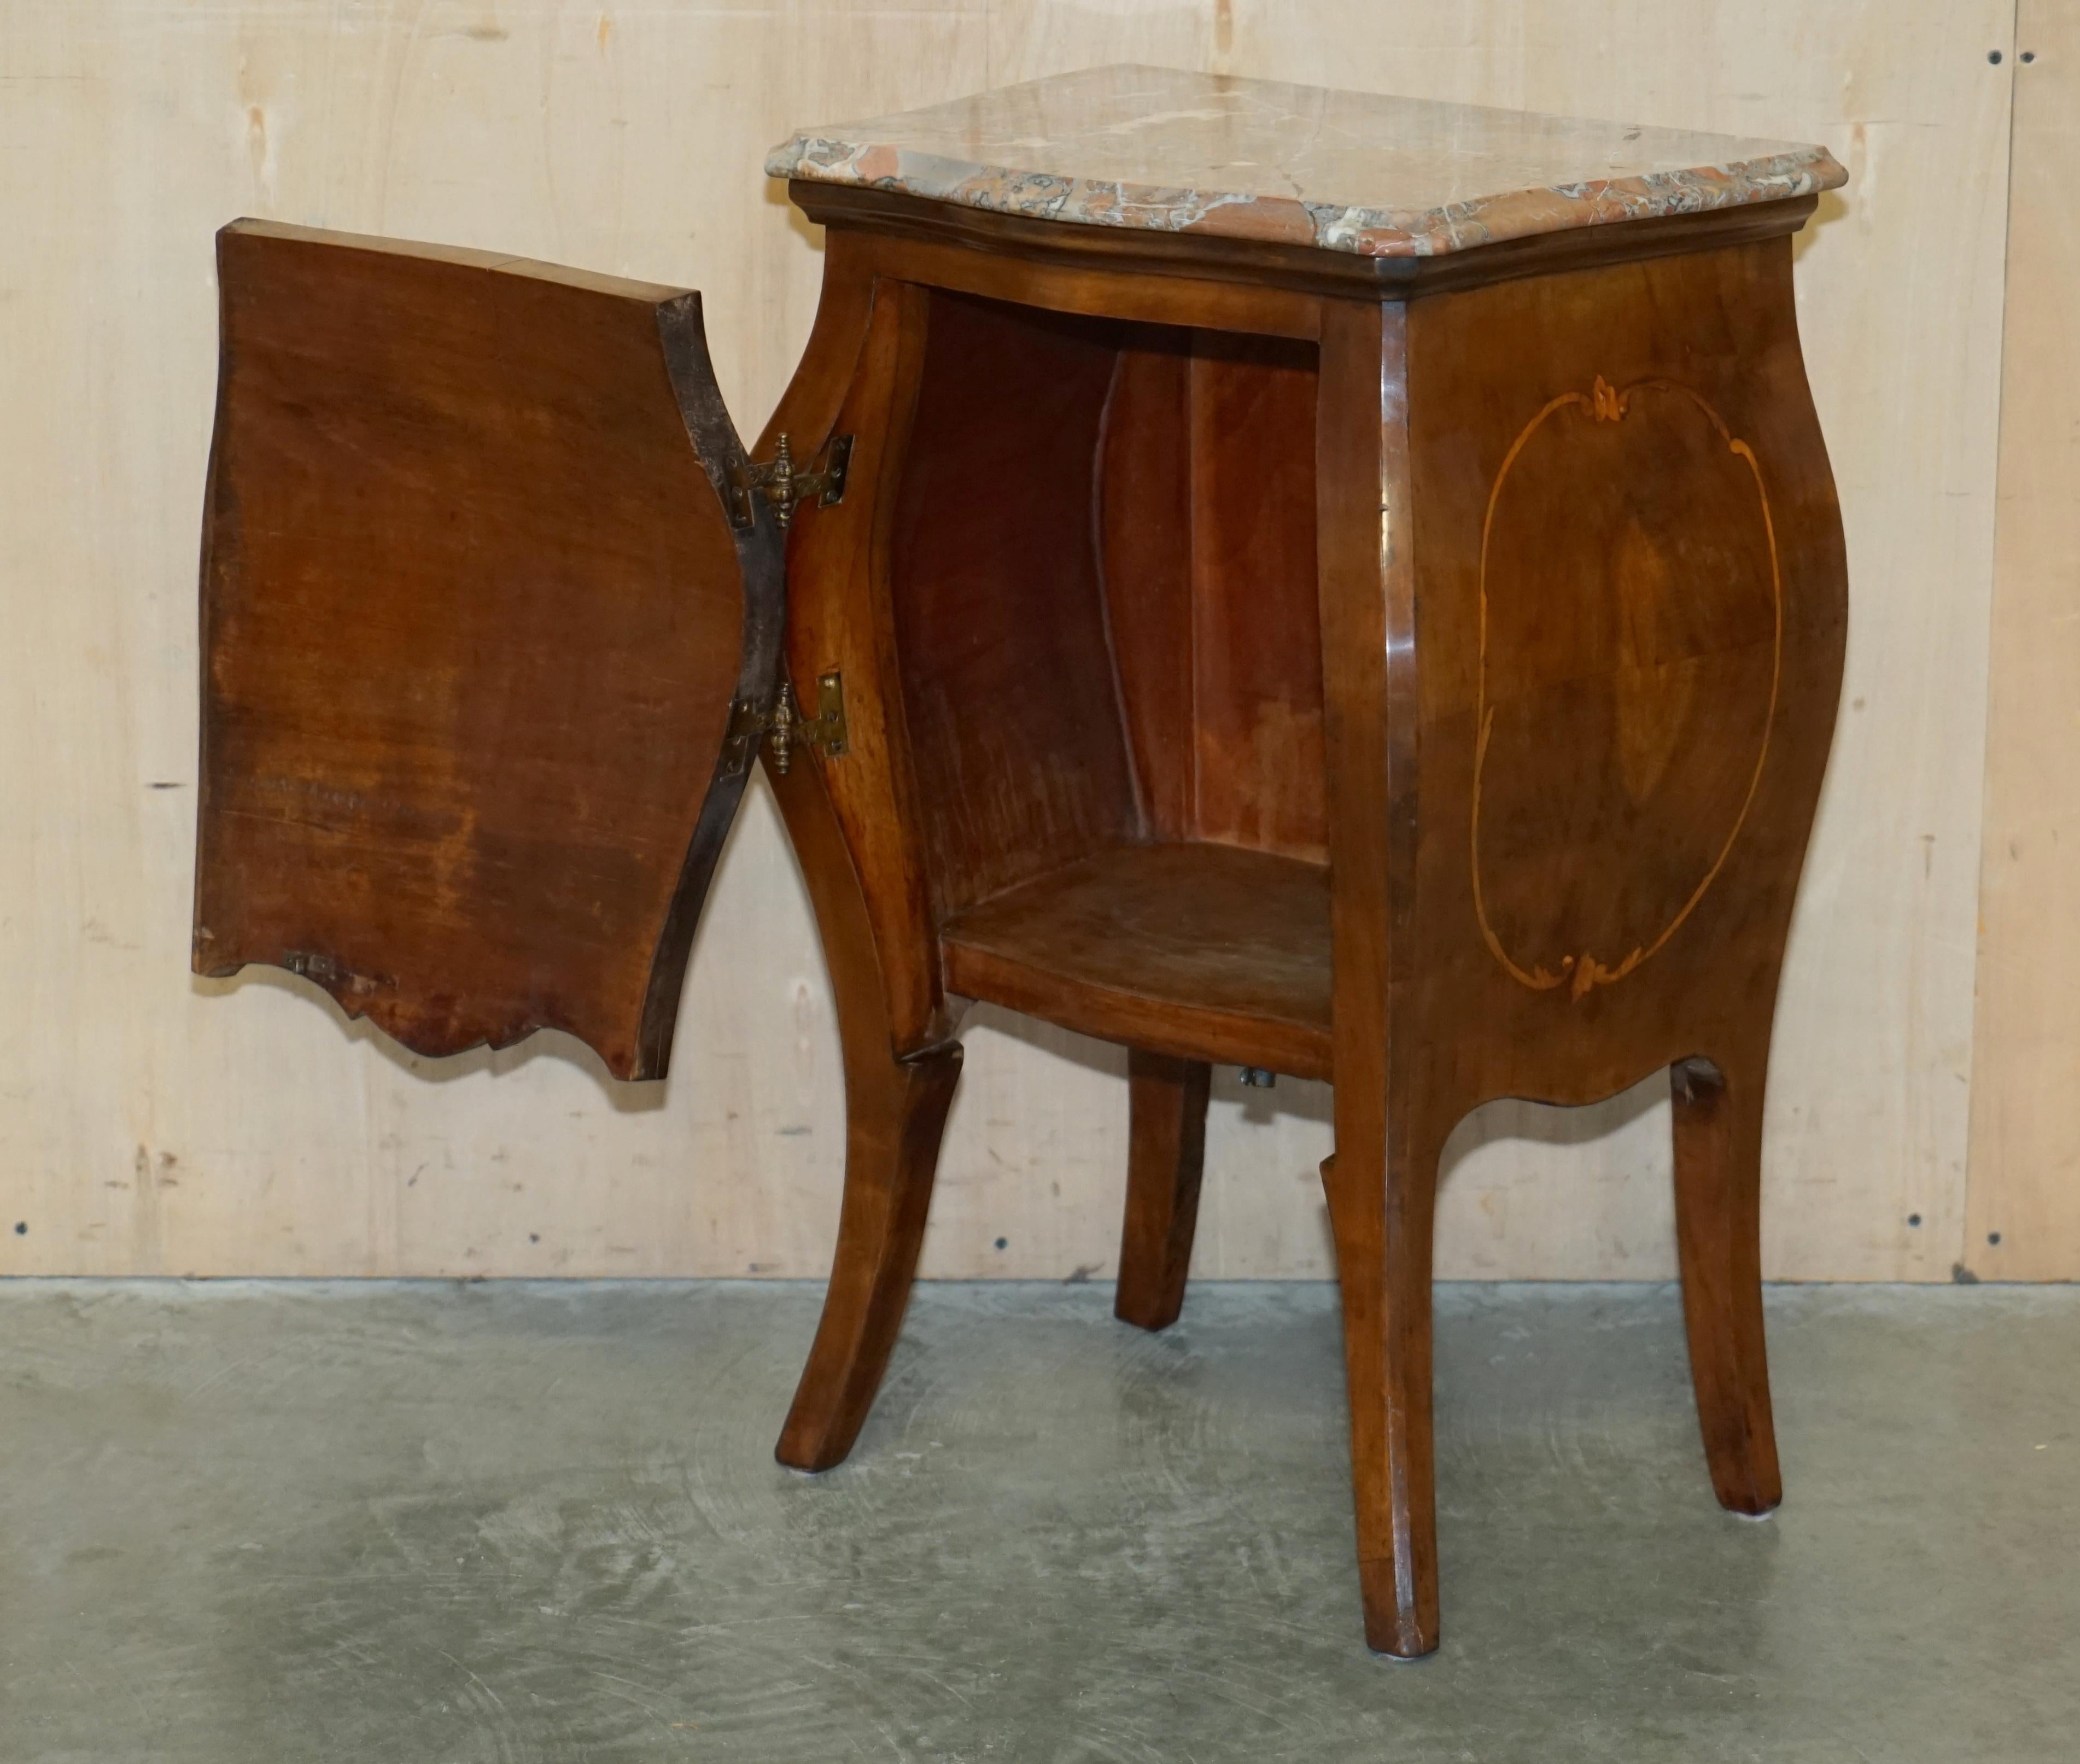 FINE PAiR OF ANTIQUE 1880 Italienische MARBLE TOP BOMBE NIGHTSTAND SIDE TABLE CHEST im Angebot 13